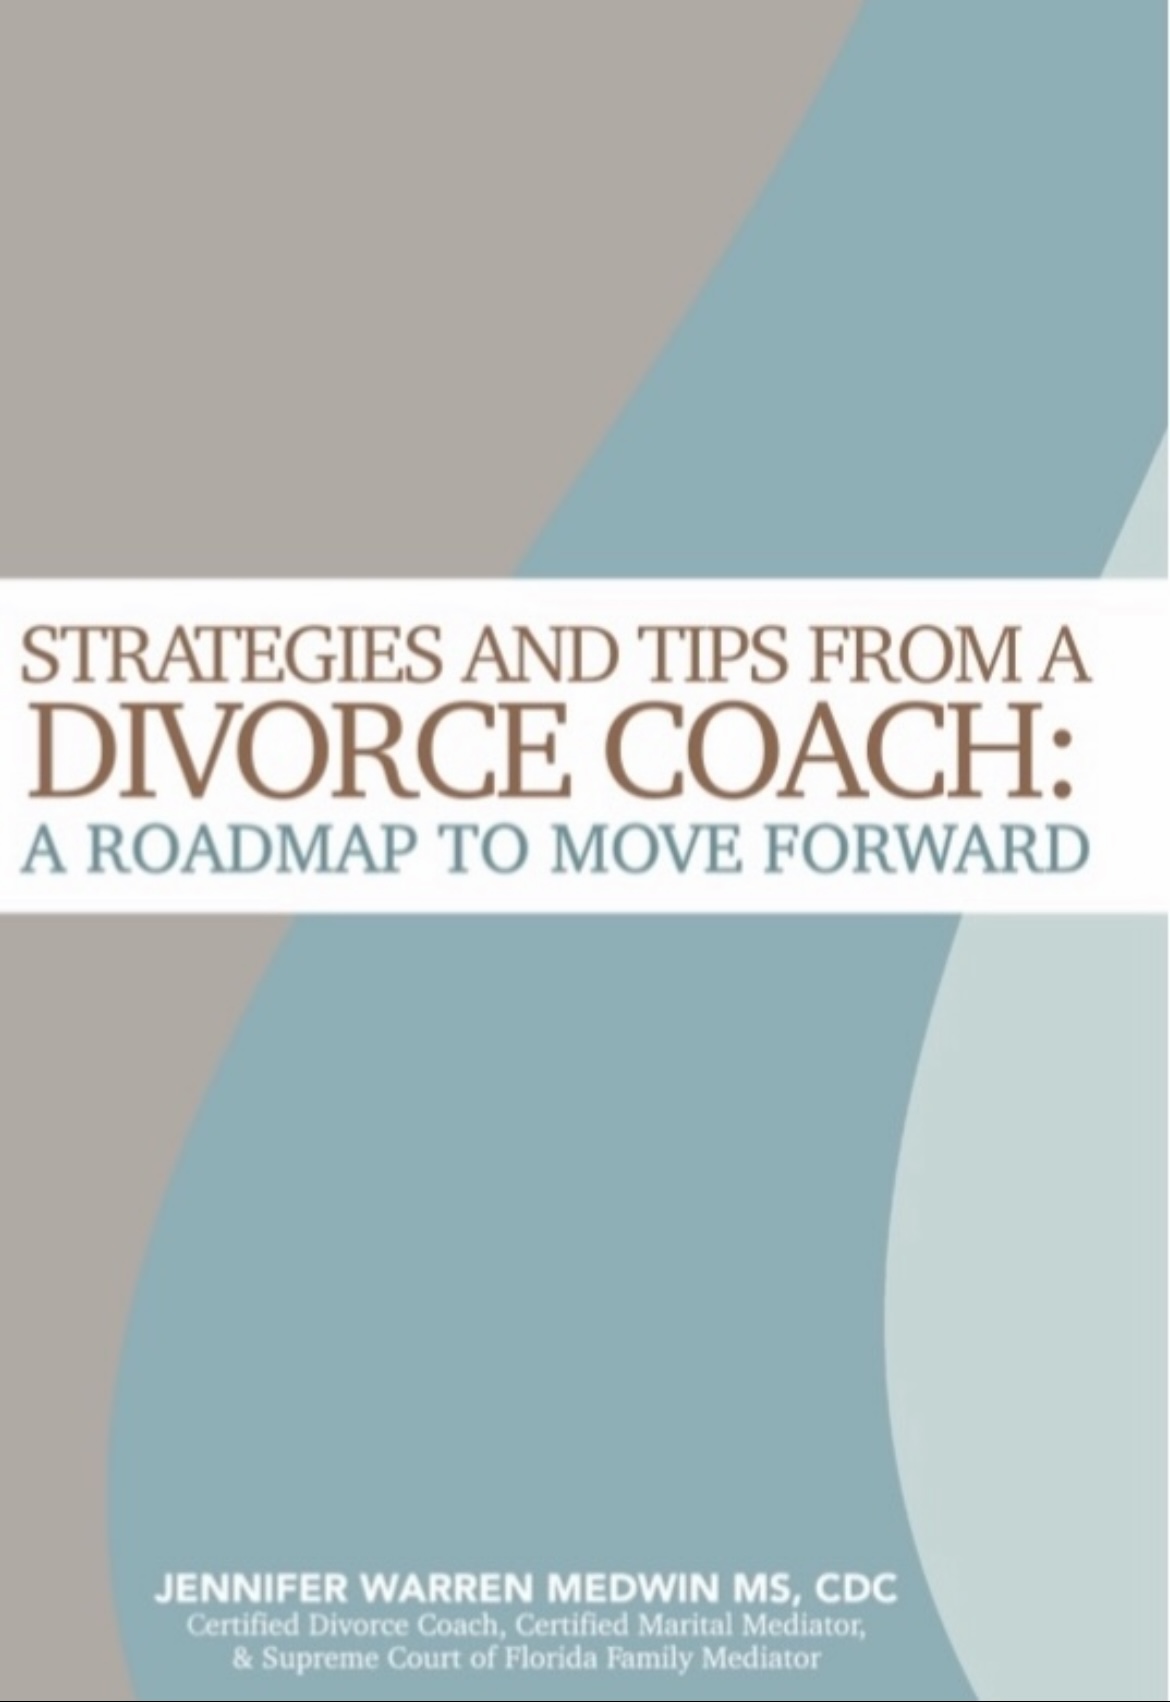 Strategies and Tips from a Divorce Coach: A Roadmap to move forward